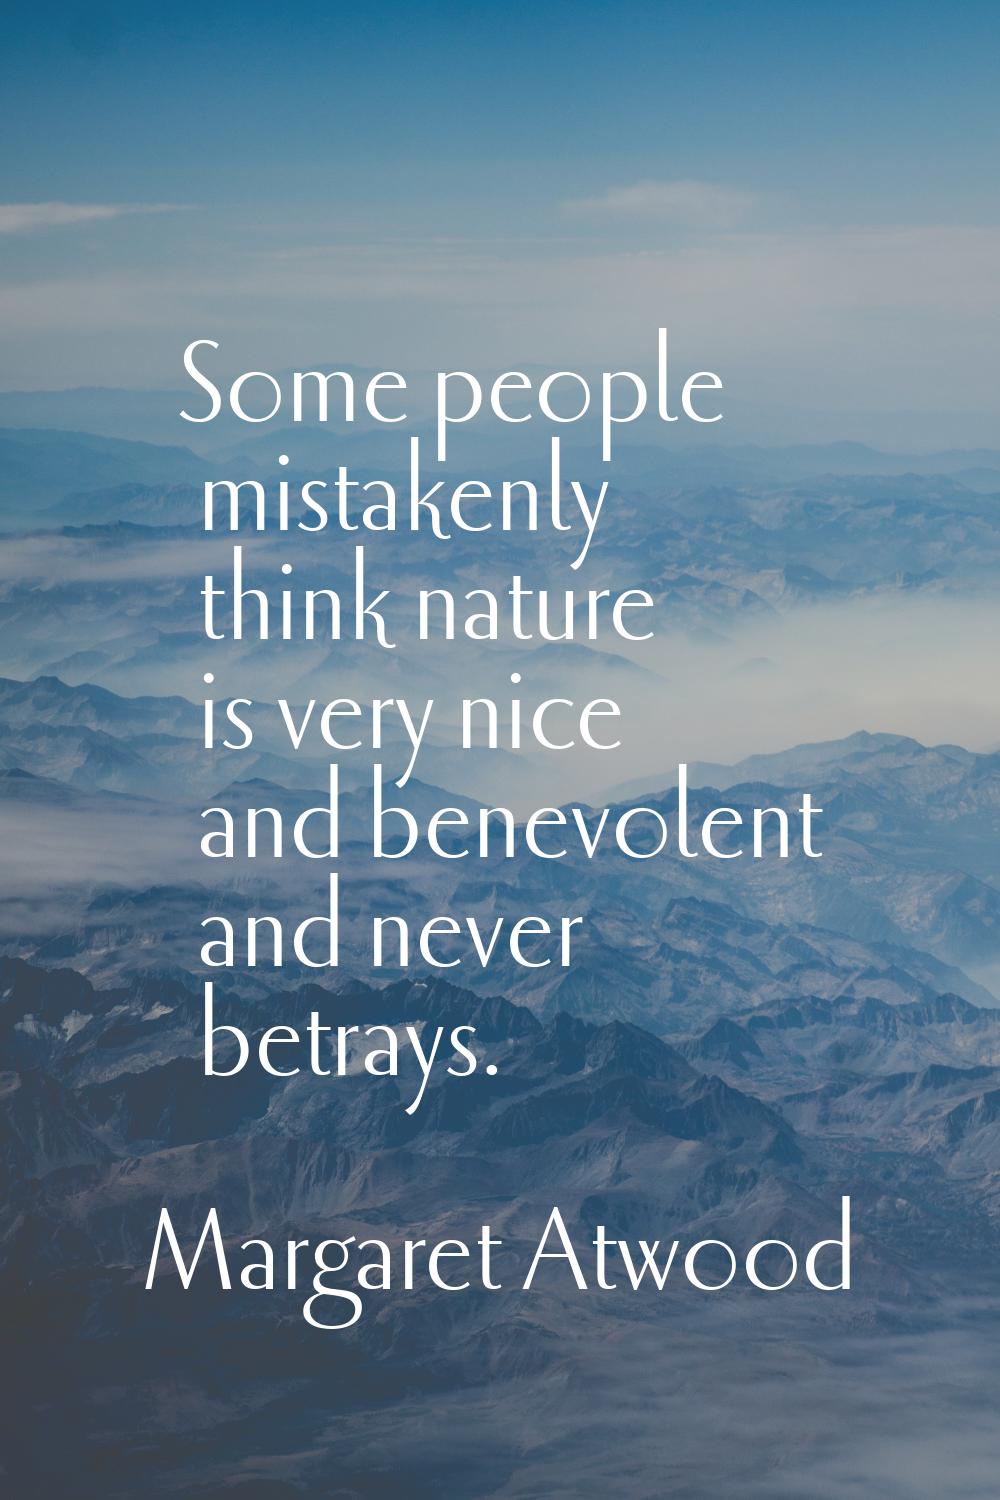 Some people mistakenly think nature is very nice and benevolent and never betrays.